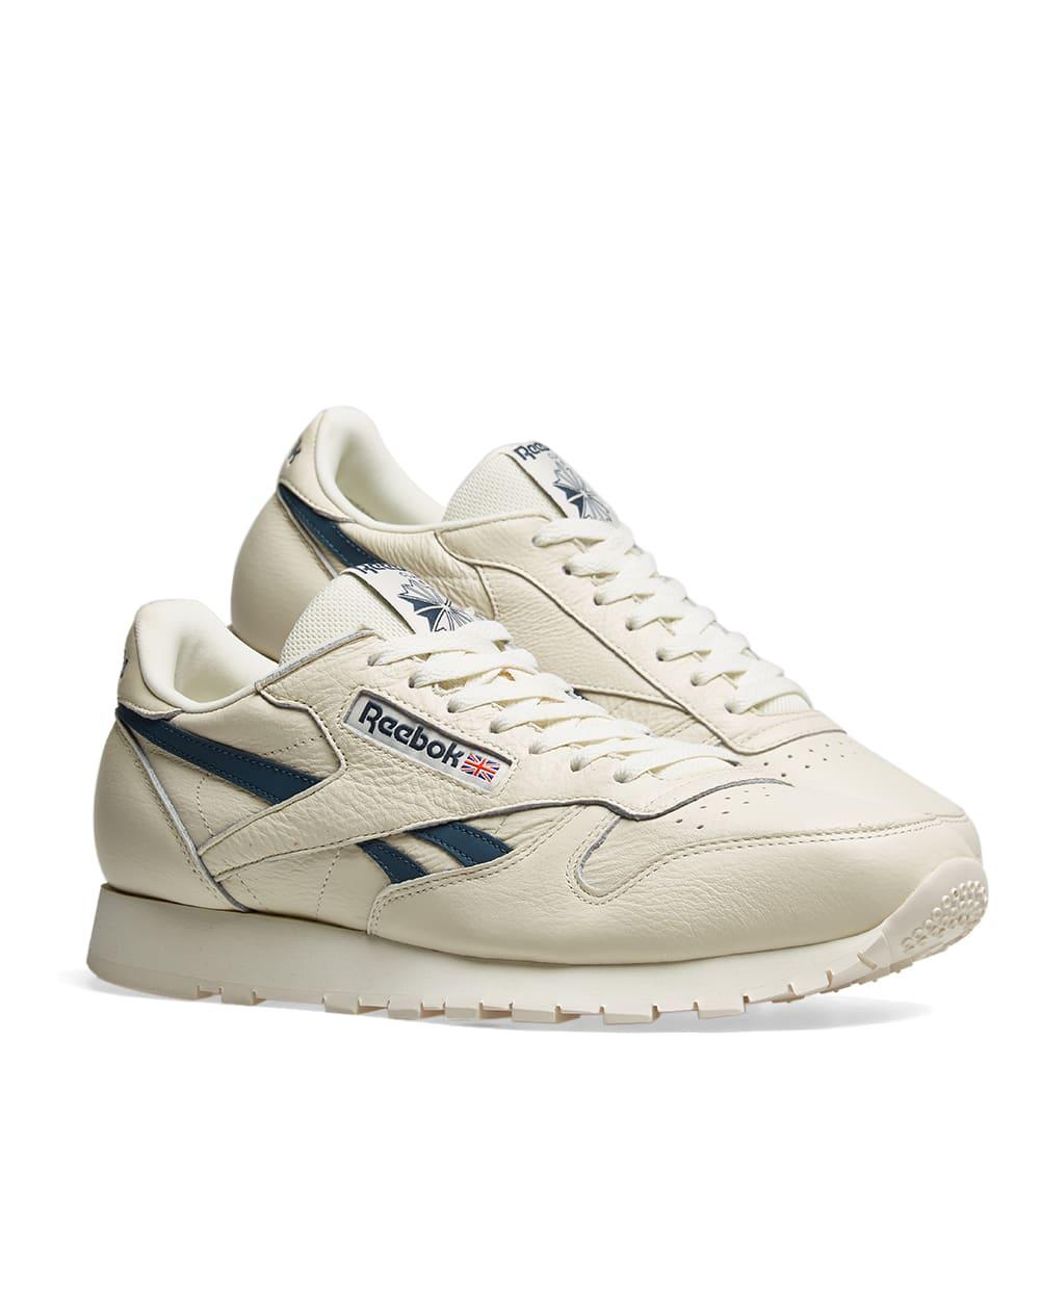 Reebok Classic Leather Vintage in White 